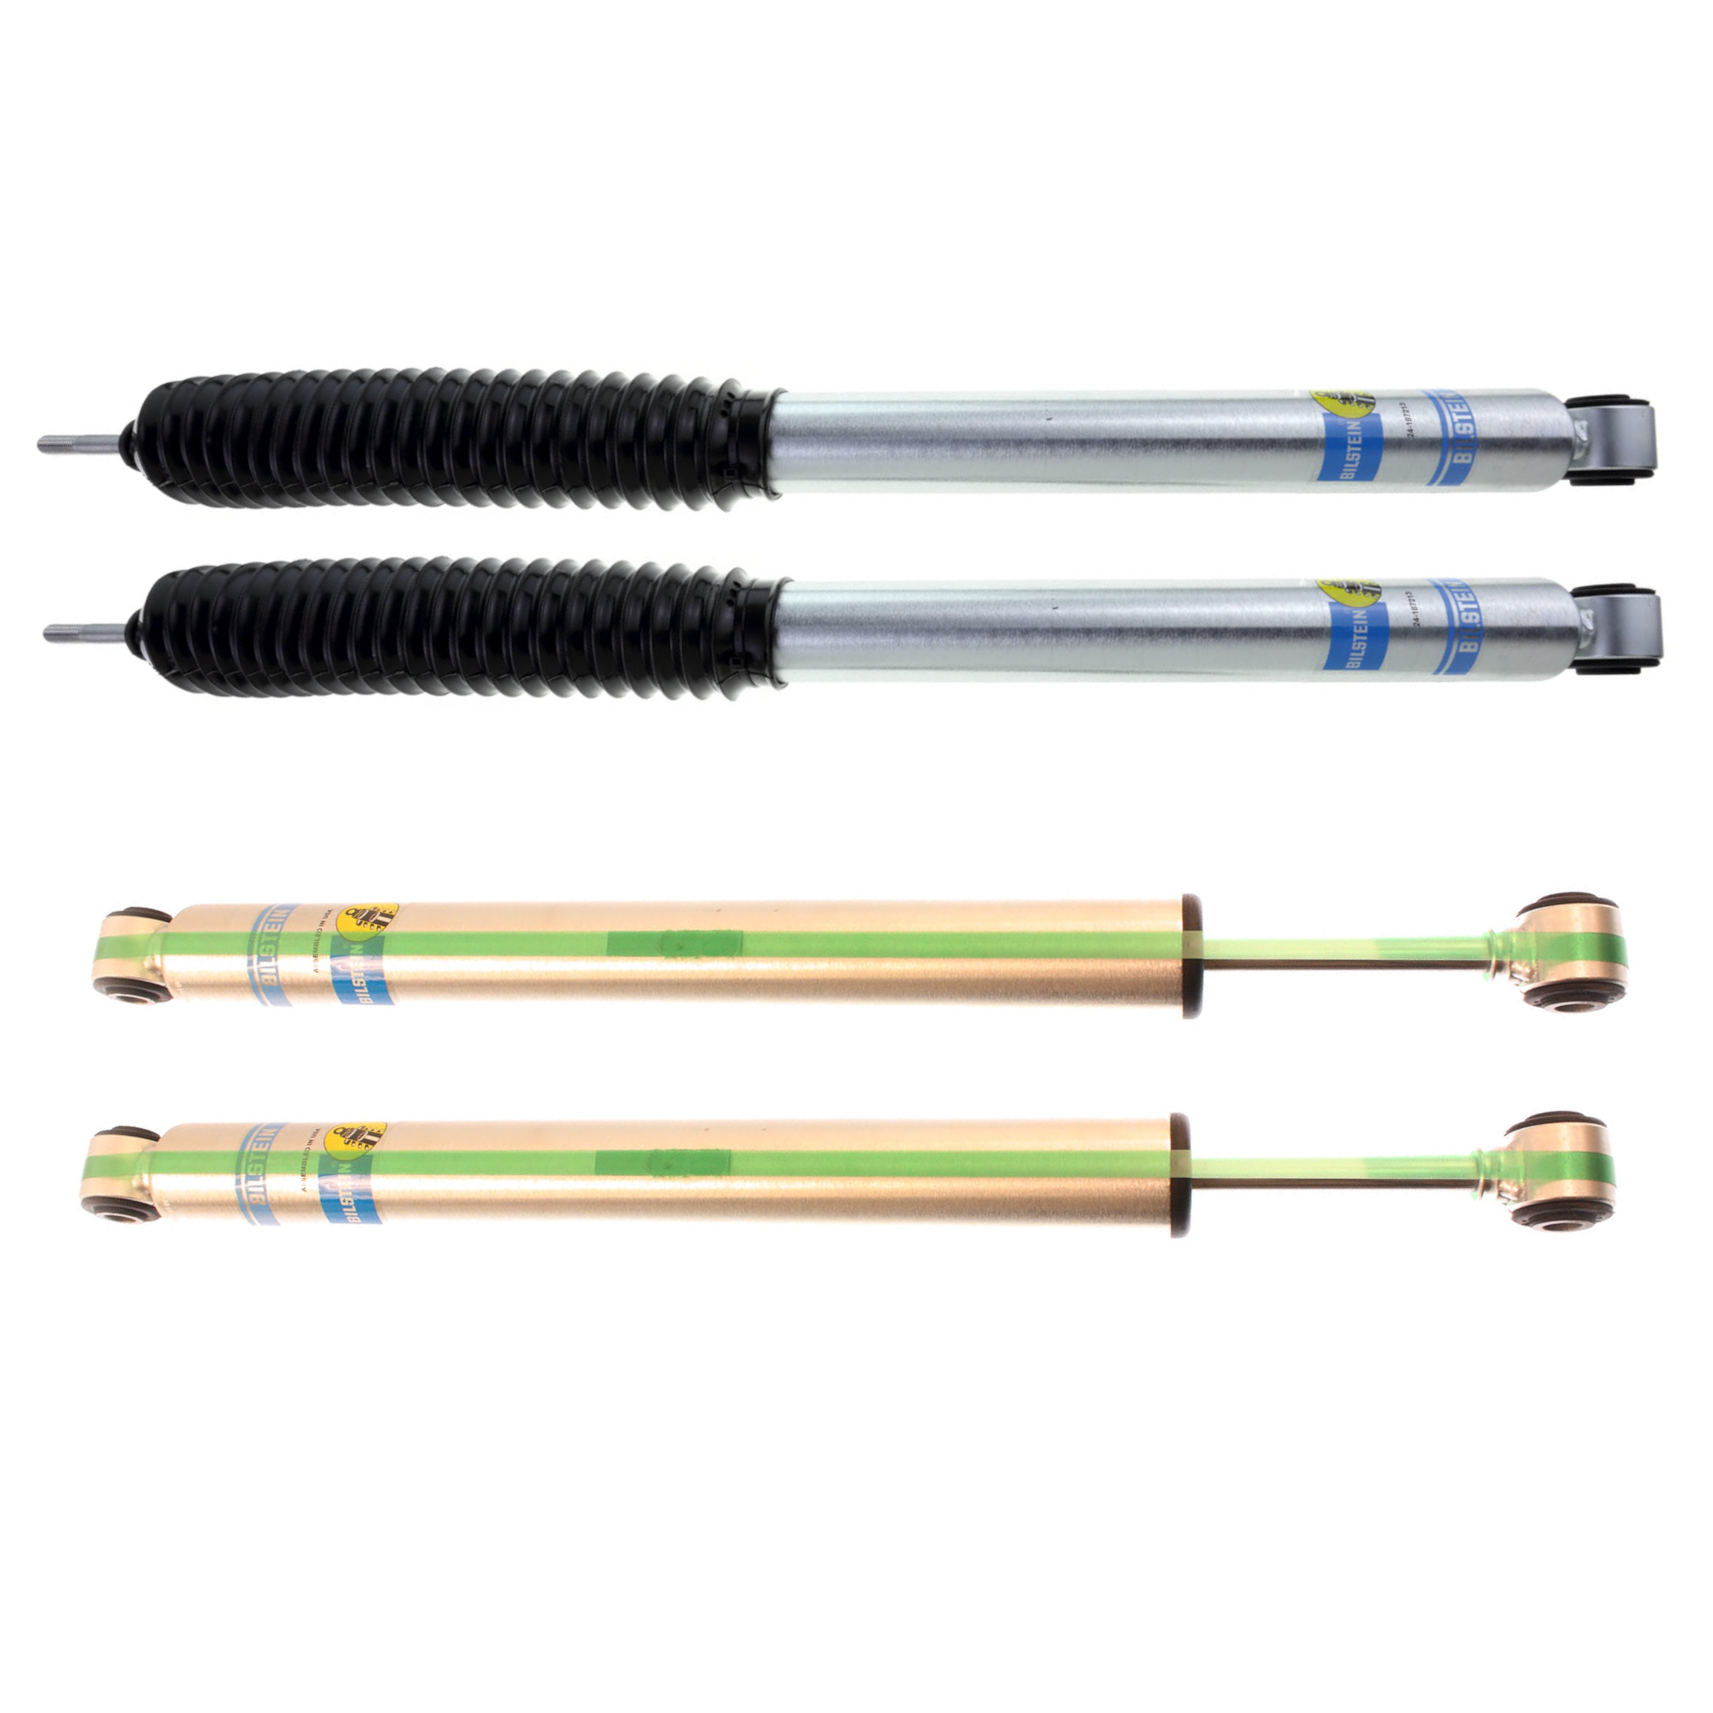 Bilstein B8 5100 Front and Rear Shocks For 6